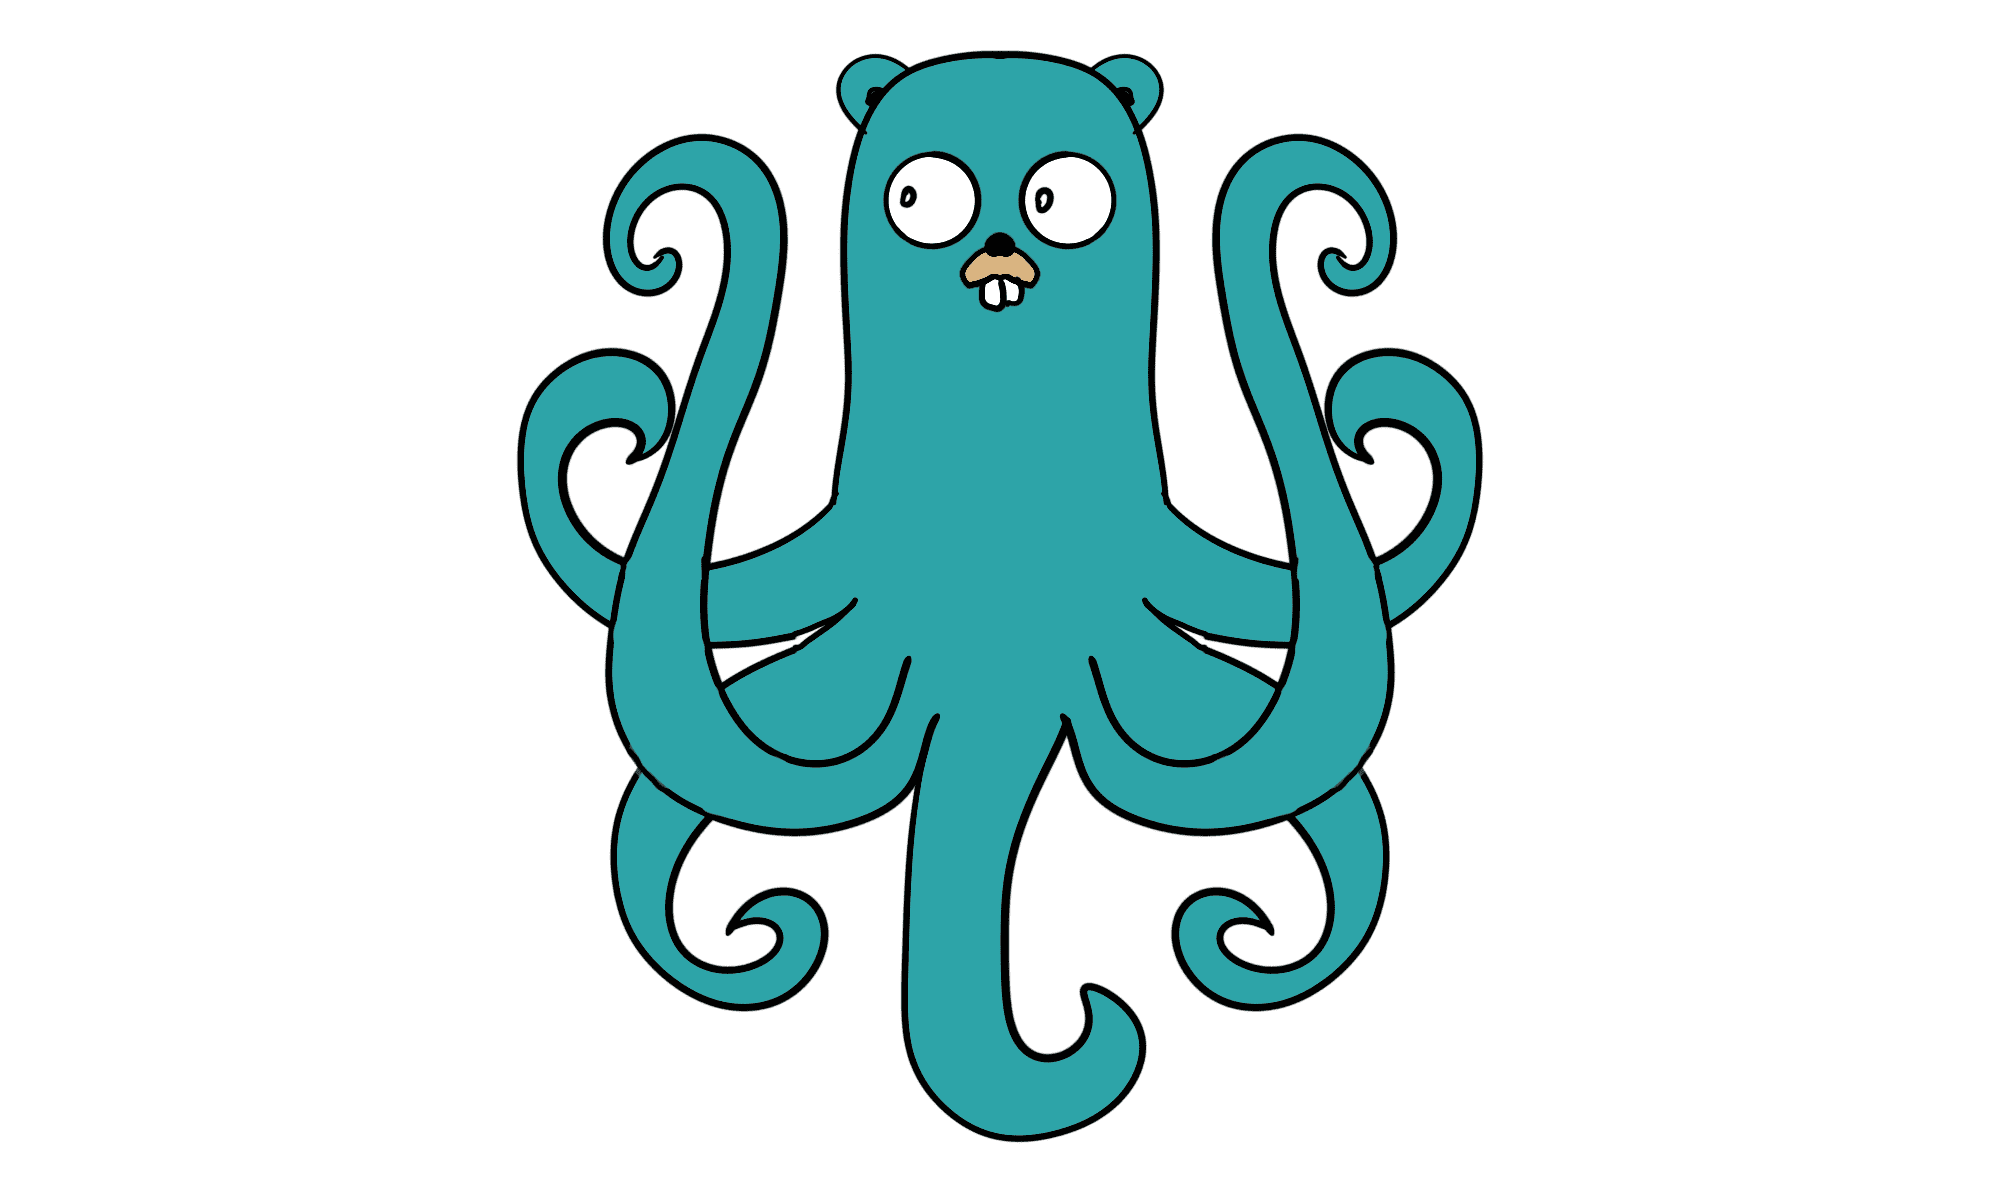 Golang's Gopher with tentacles